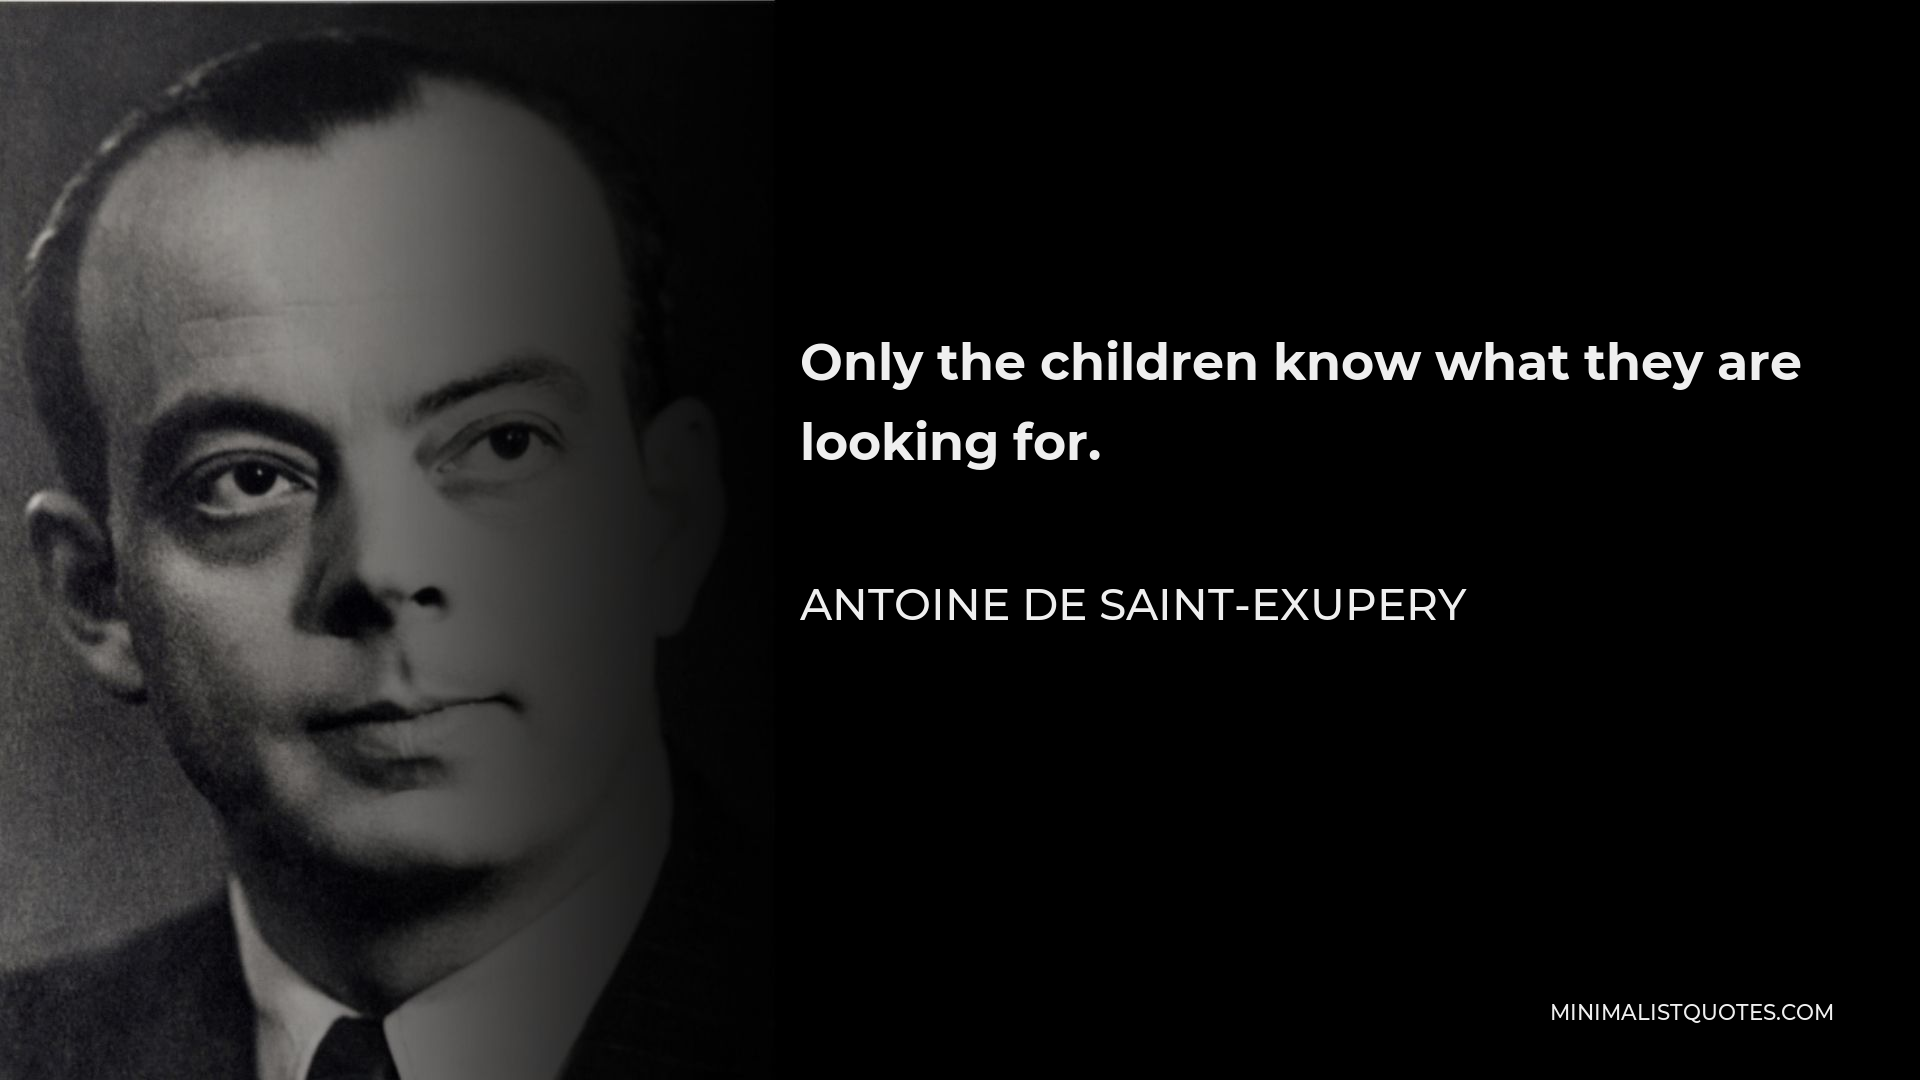 Antoine de Saint-Exupery Quote - Only the children know what they are looking for.